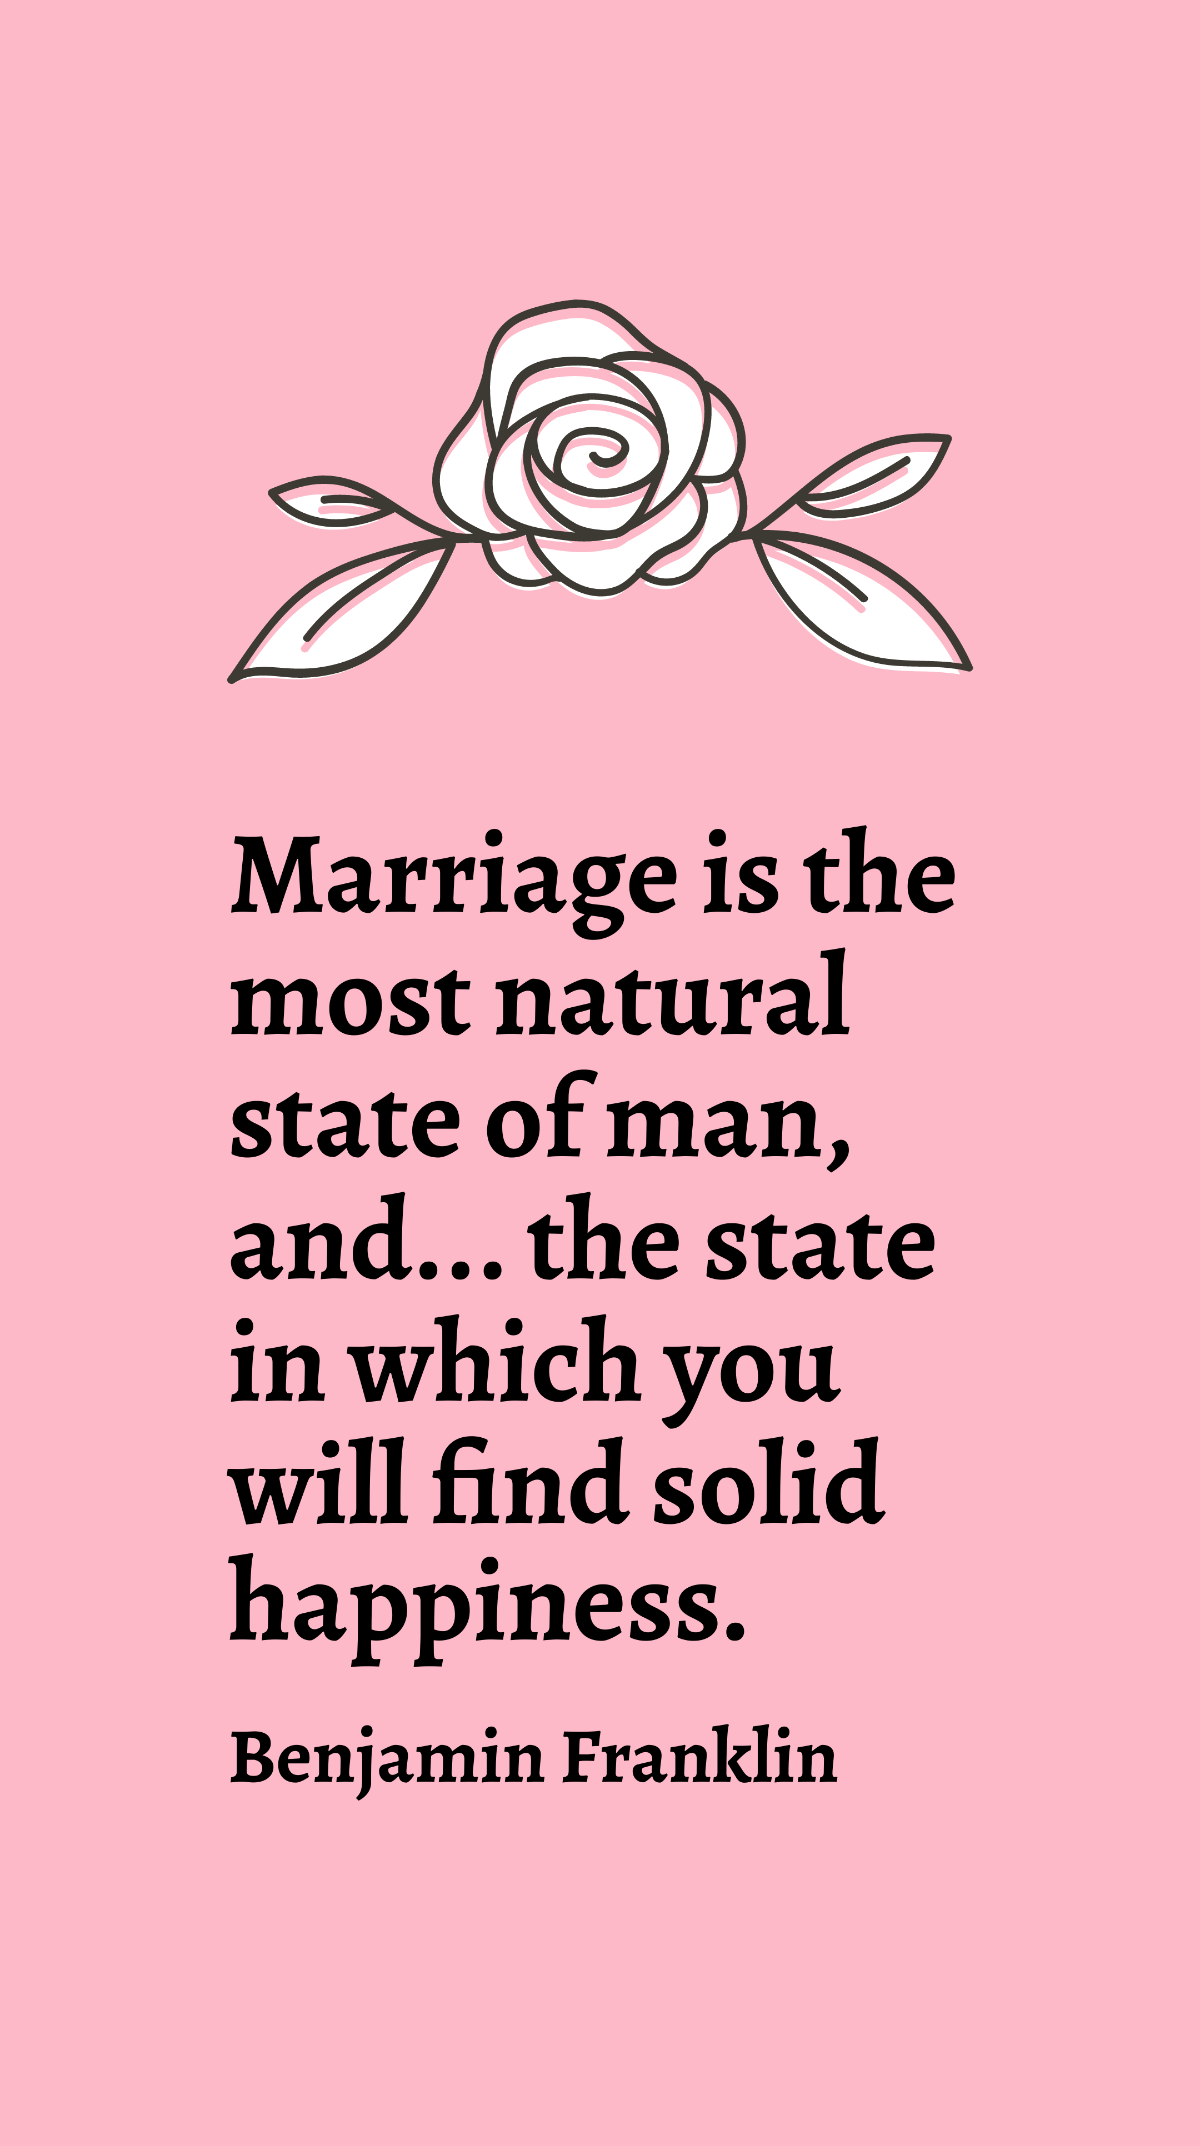 Free Benjamin Franklin - Marriage is the most natural state of man, and... the state in which you will find solid happiness. Template